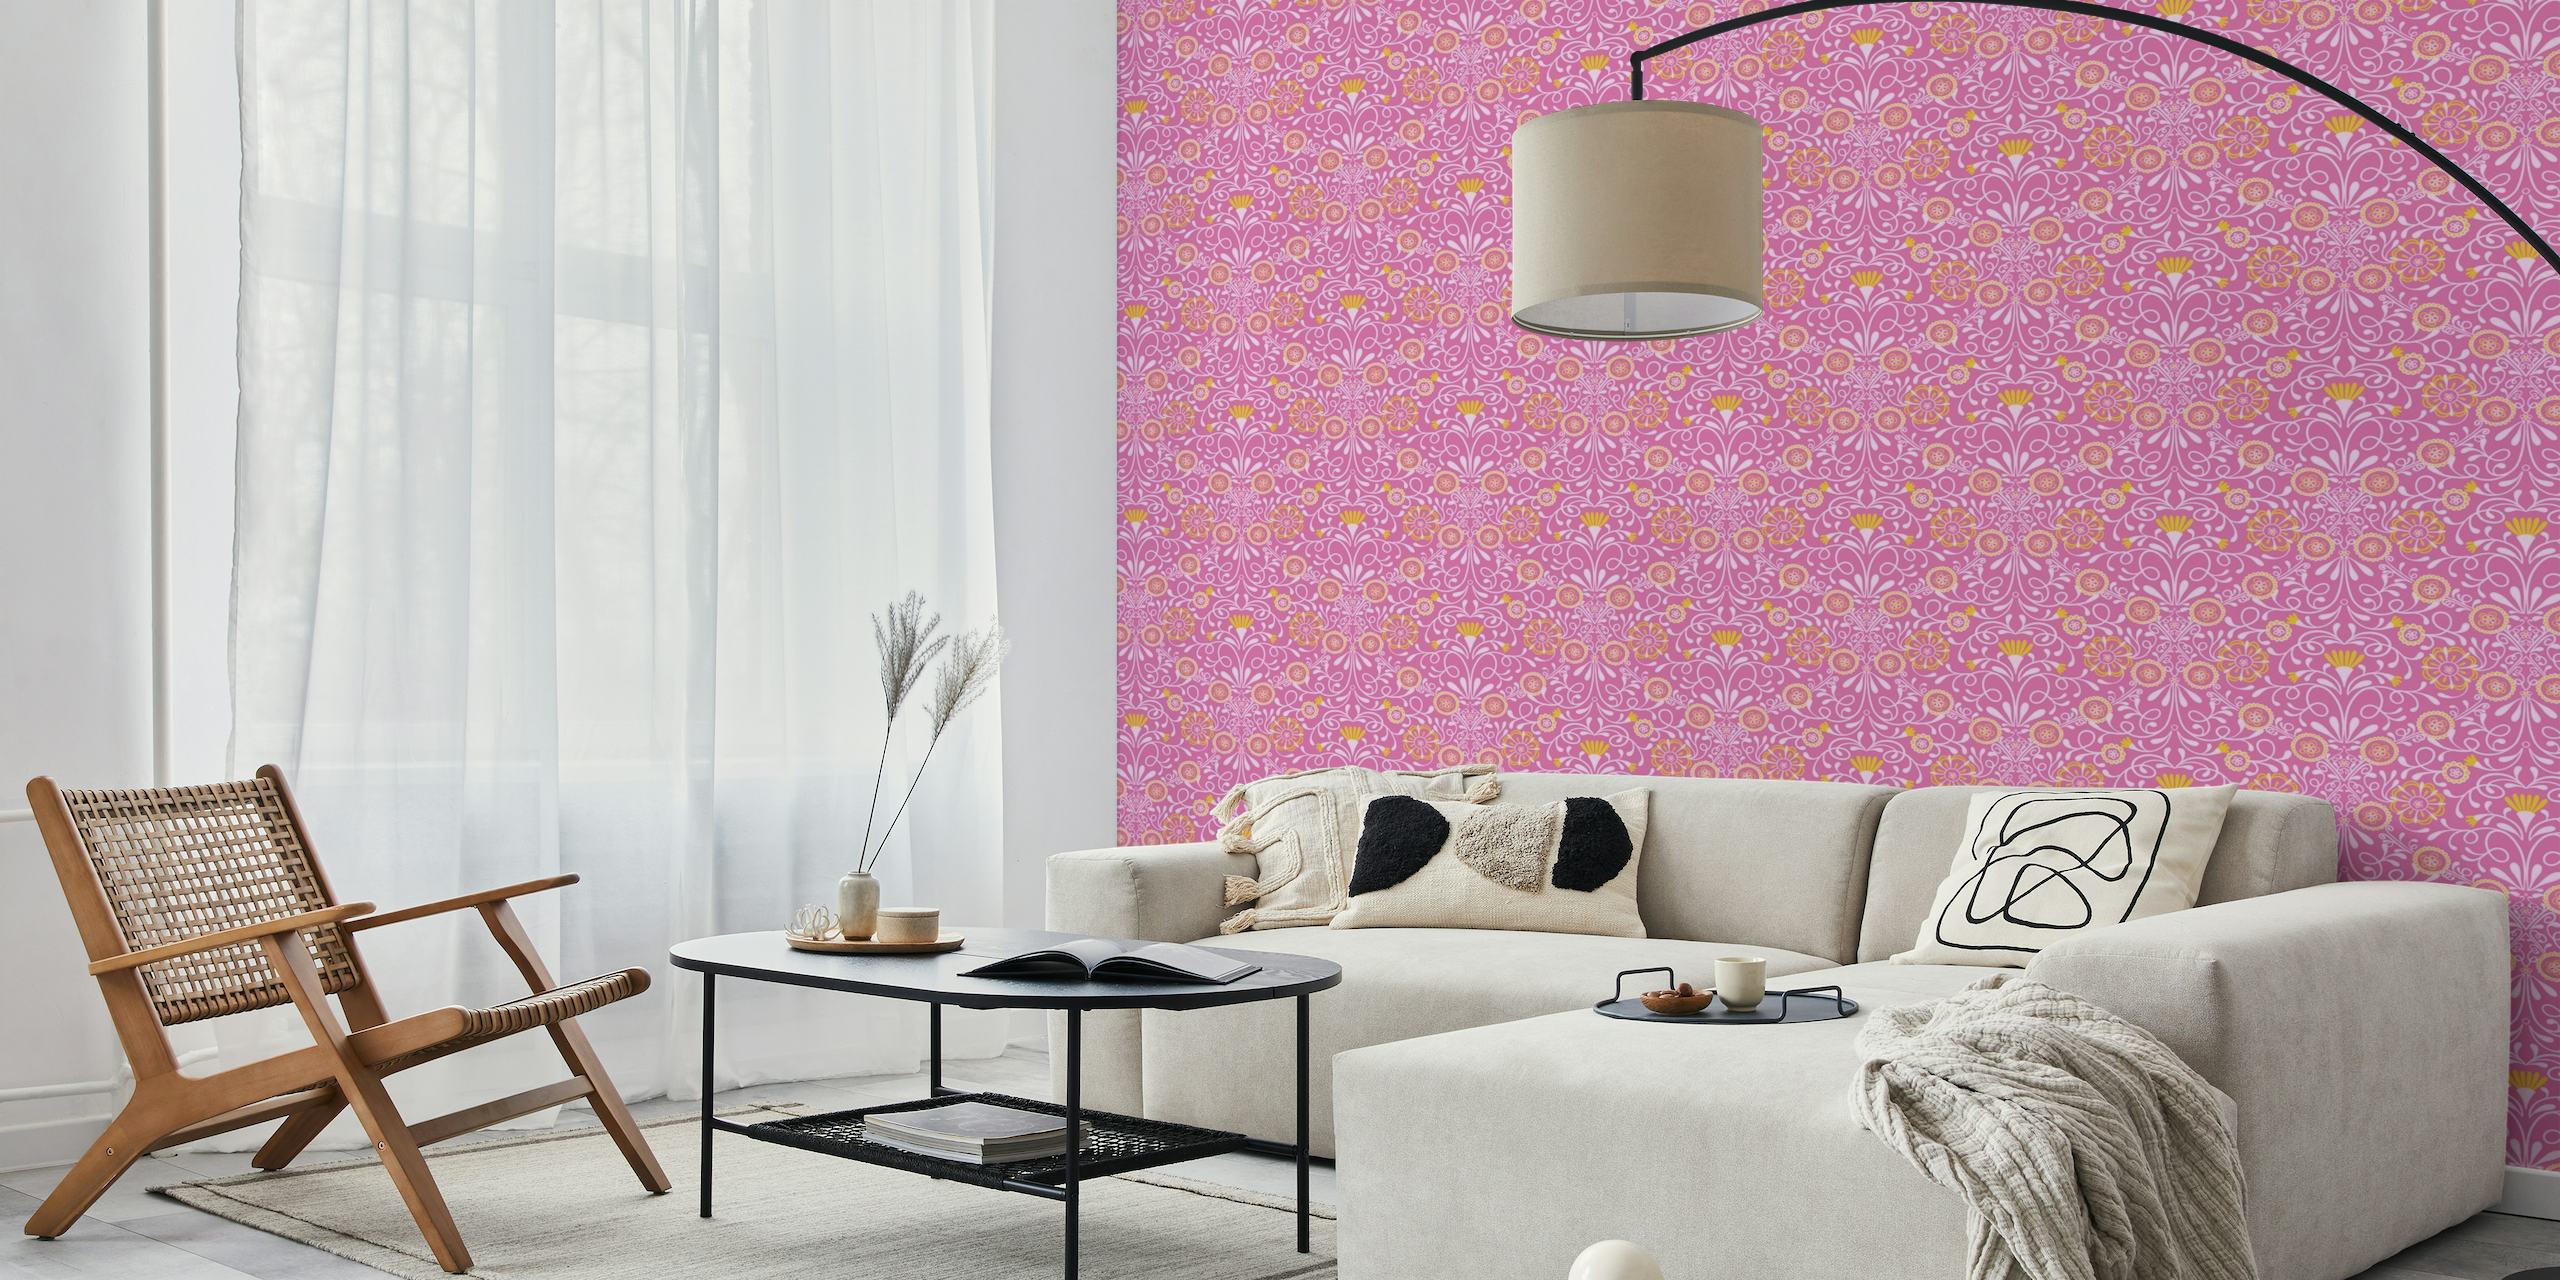 Tuscan Tile in Pink and Yellow wallpaper